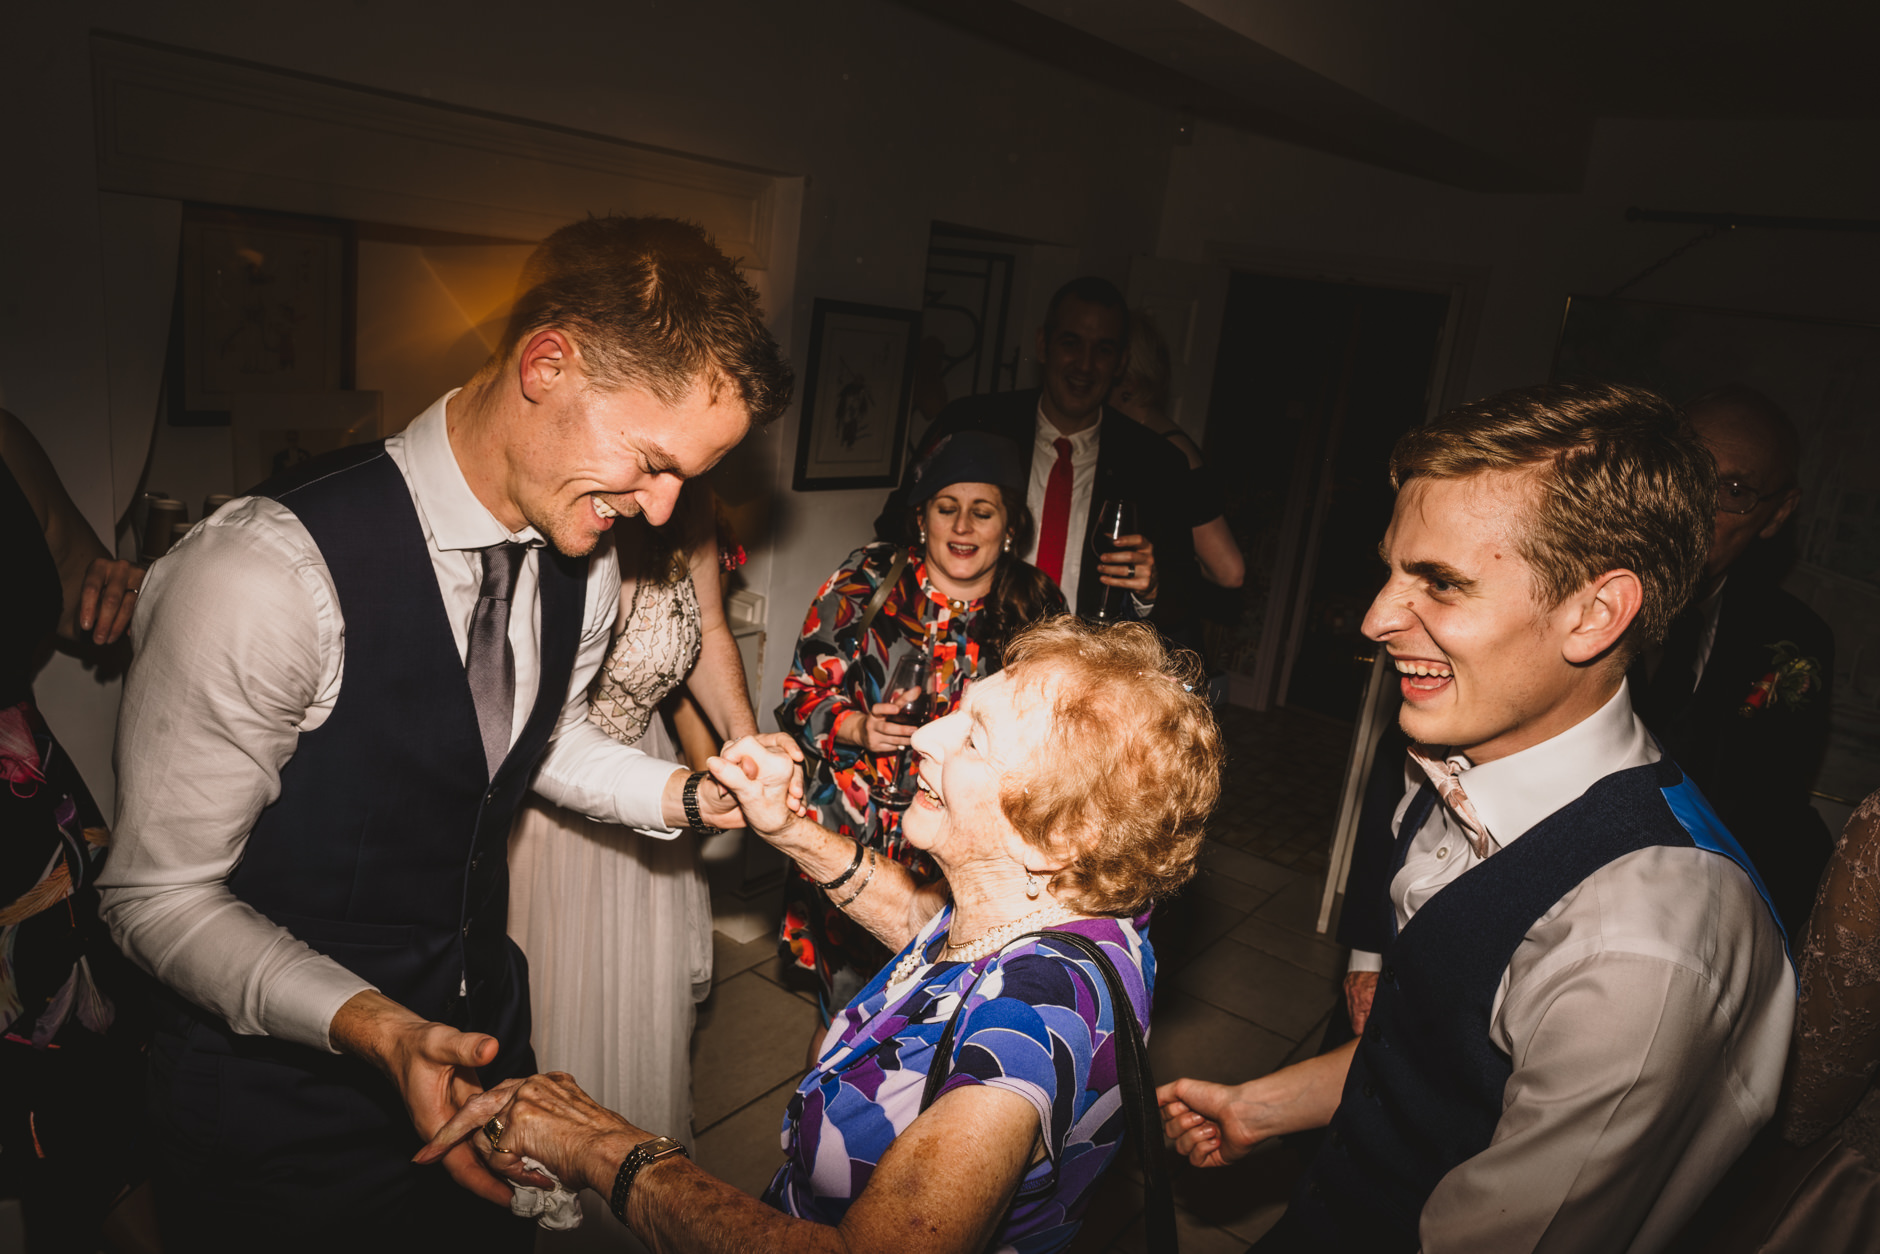 groom's grandma dances with a young guest at east bridgford hill wedding